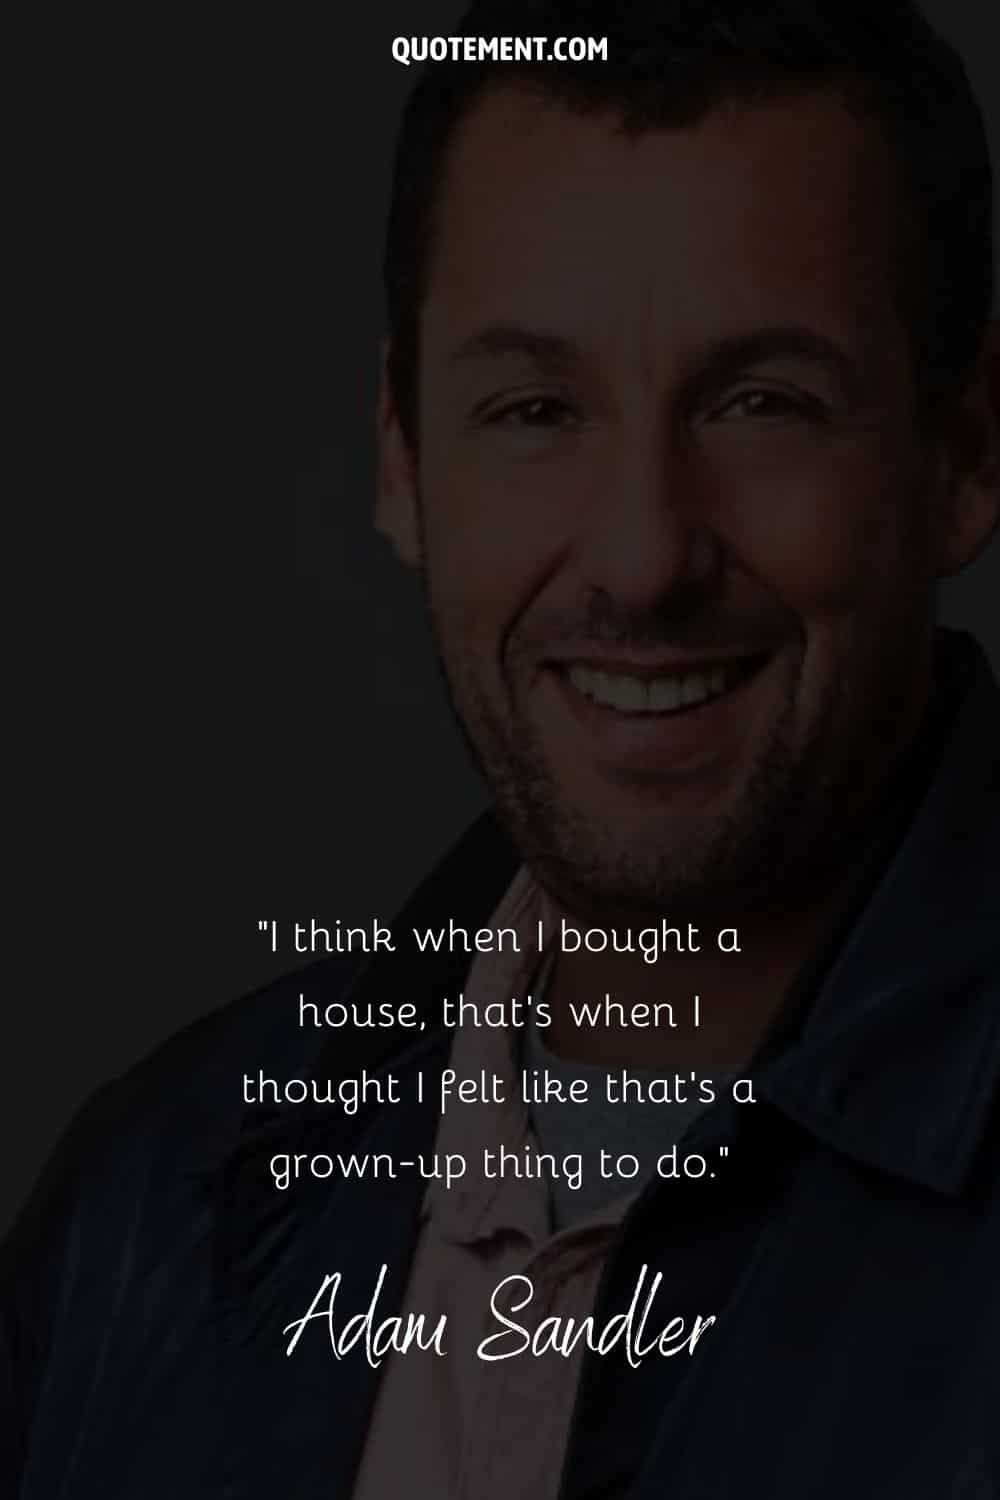 Adam Sandler image representing his quote about adulthood